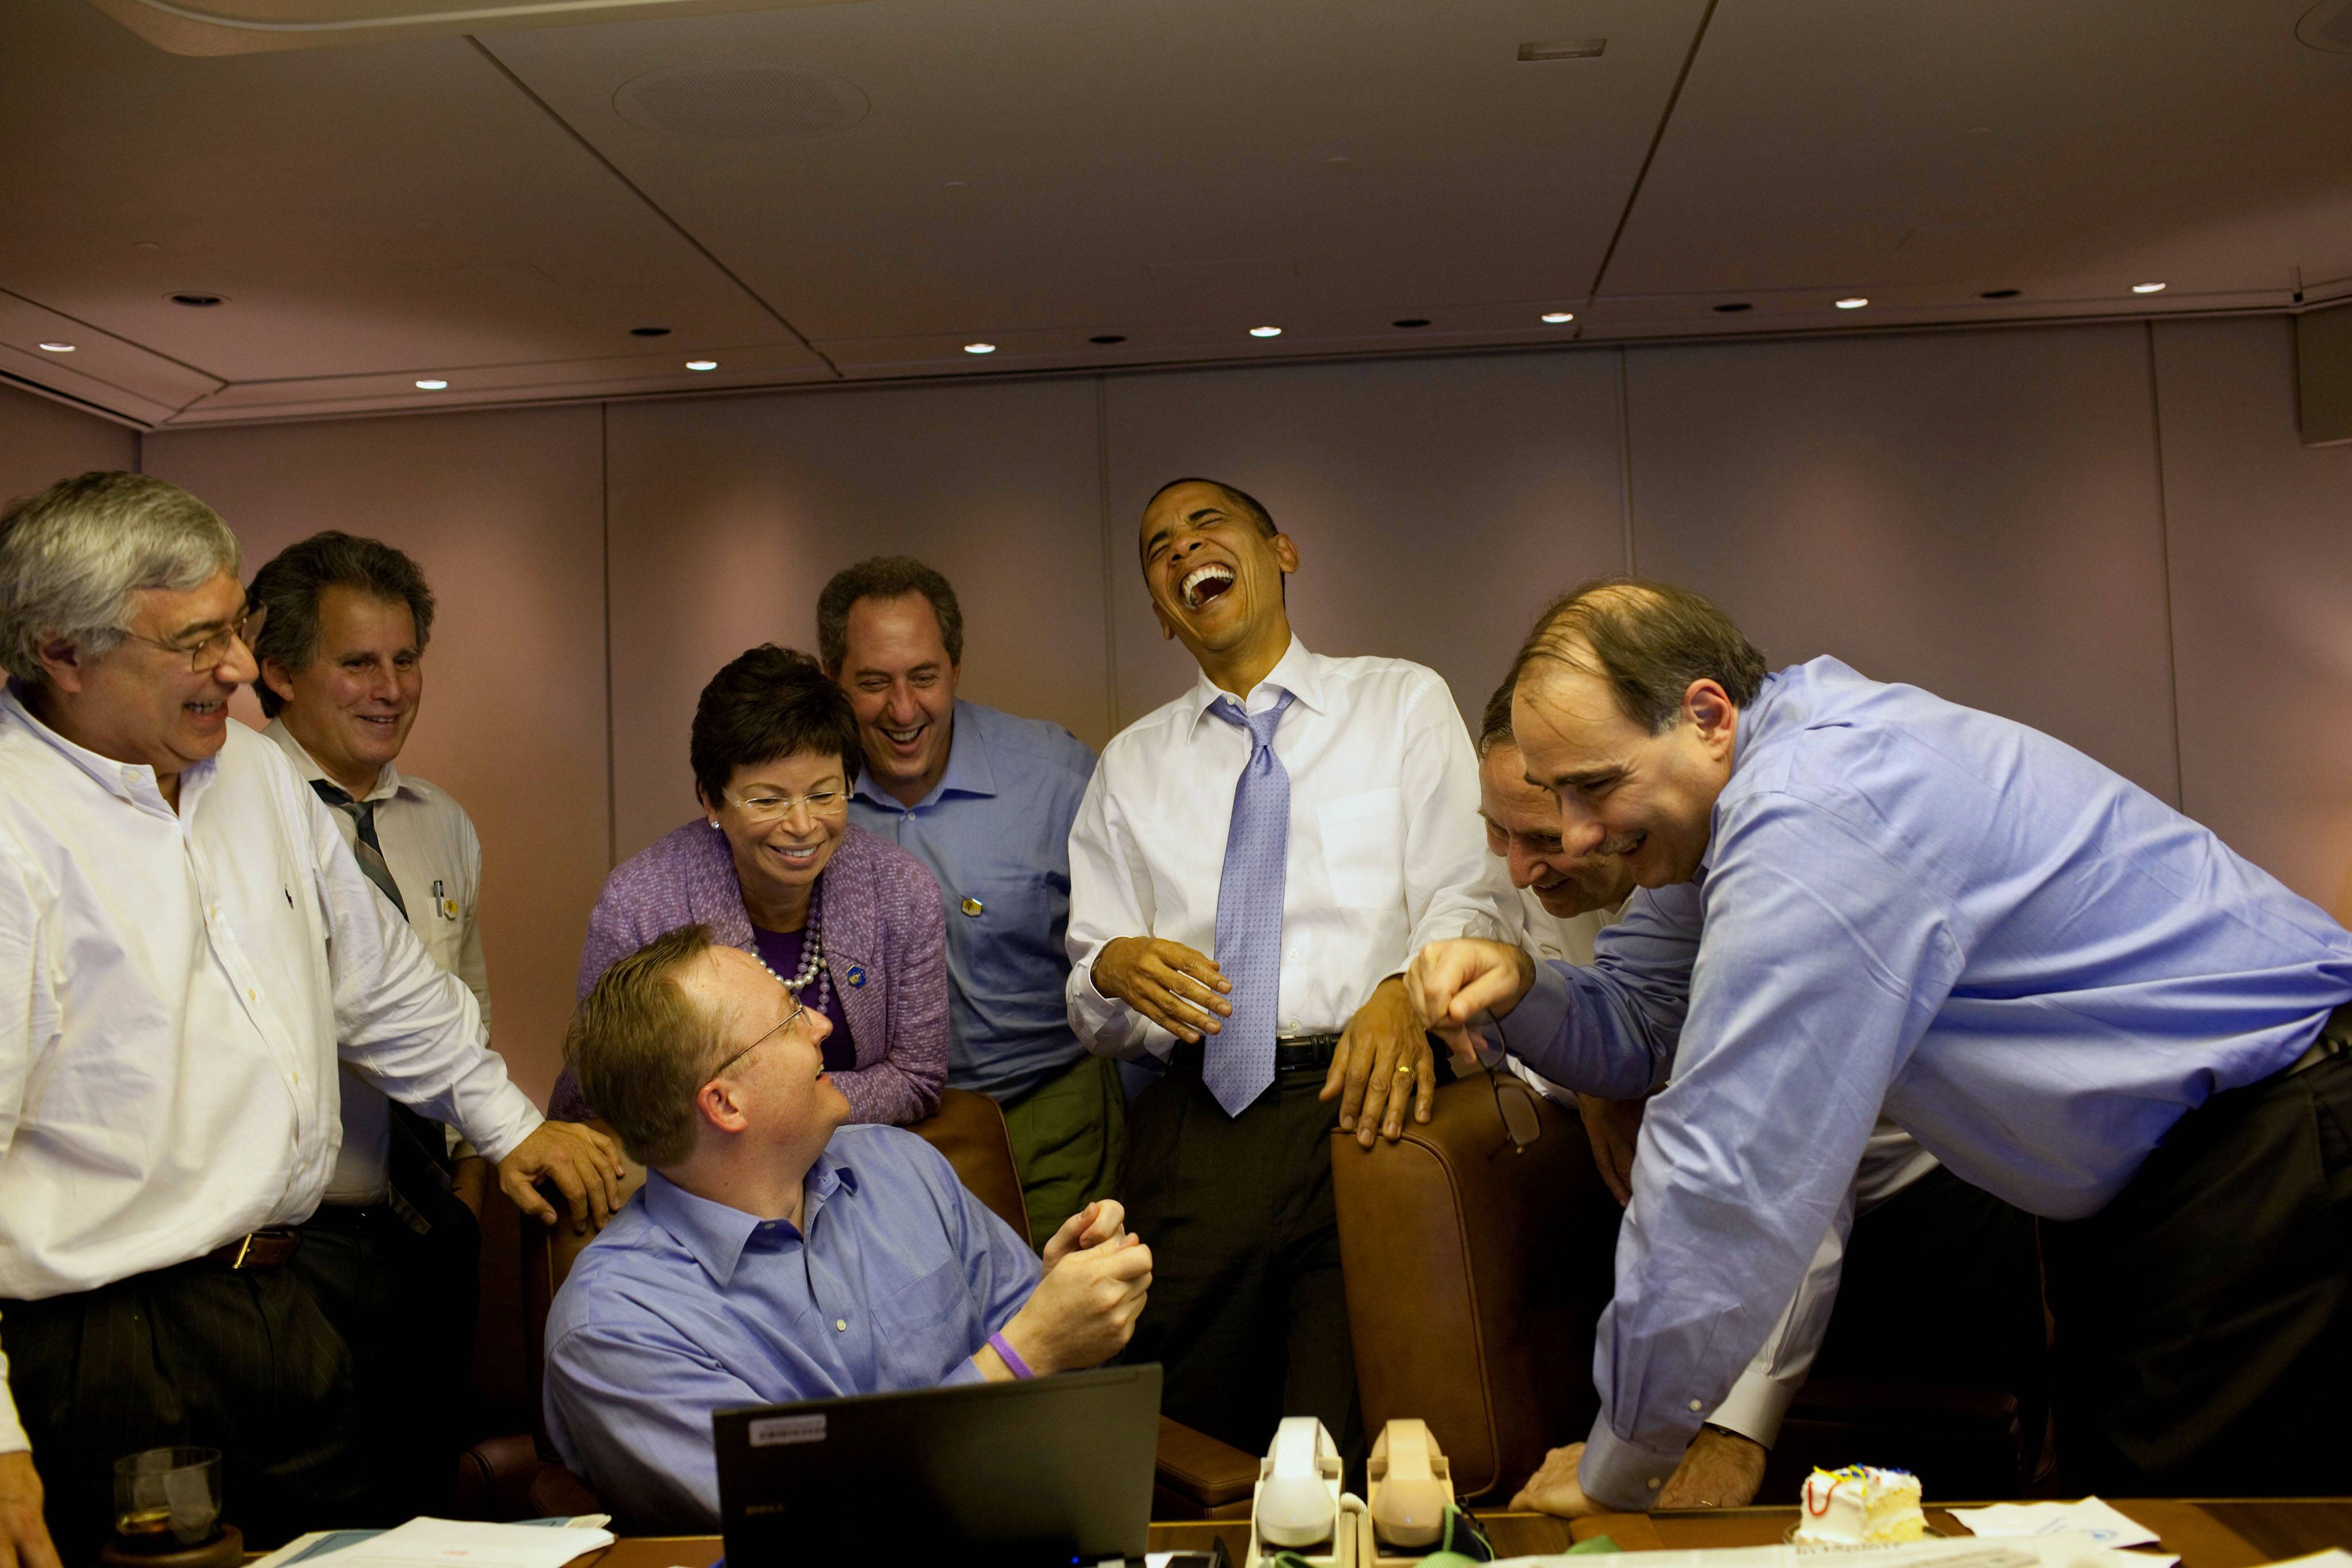 Barack_Obama_laughs_with_his_staff_on_Air_Force_One.jpg